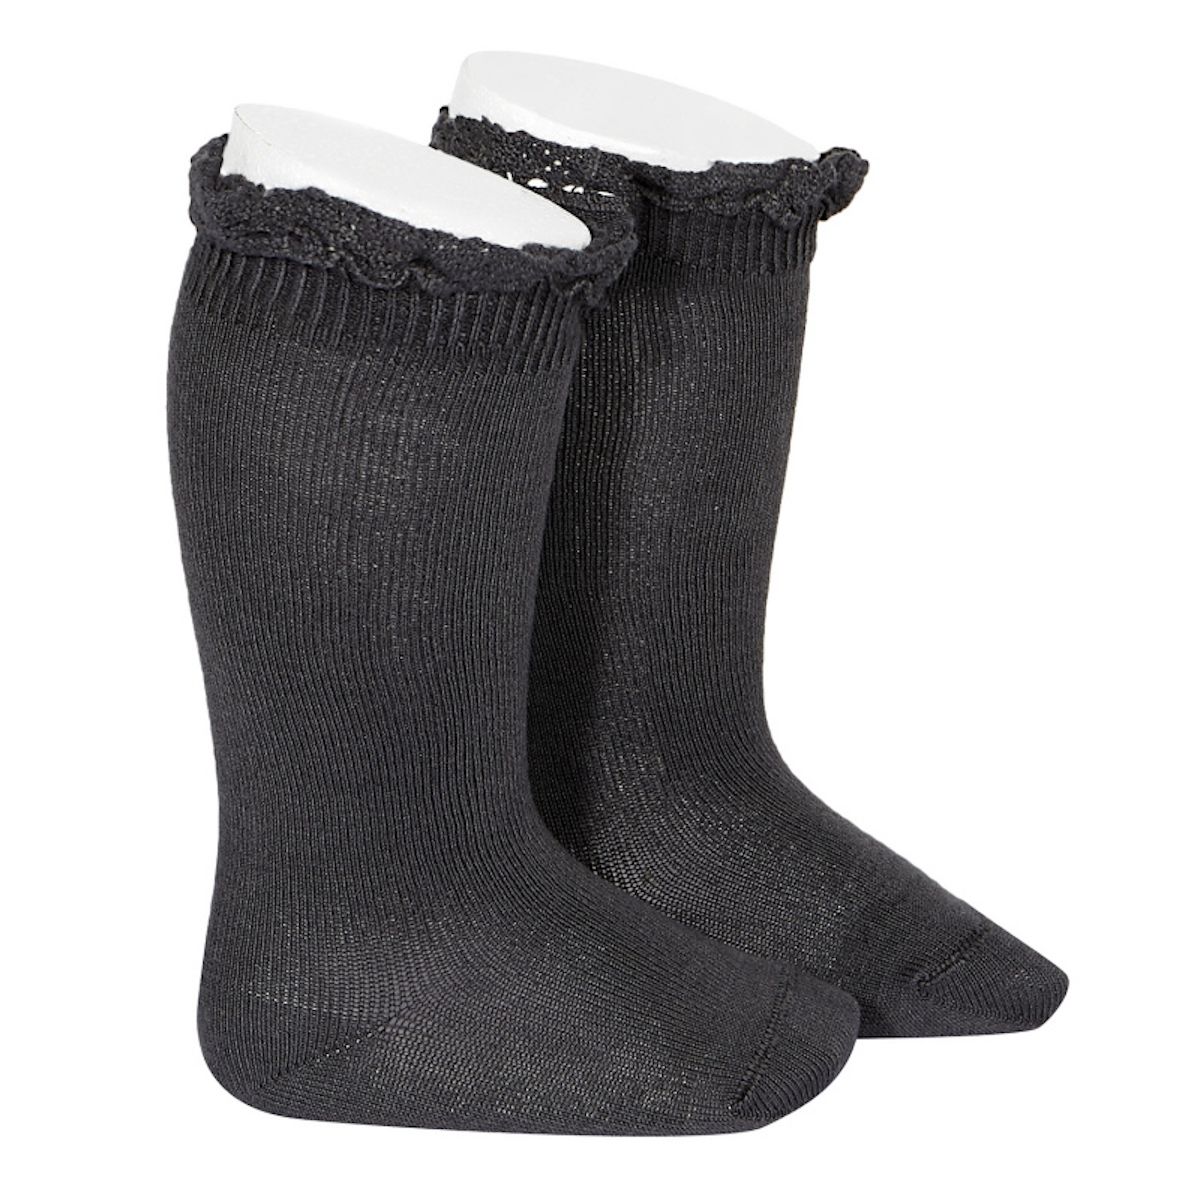 Condor Knee Socks With Lace coal 2.409/2_257 